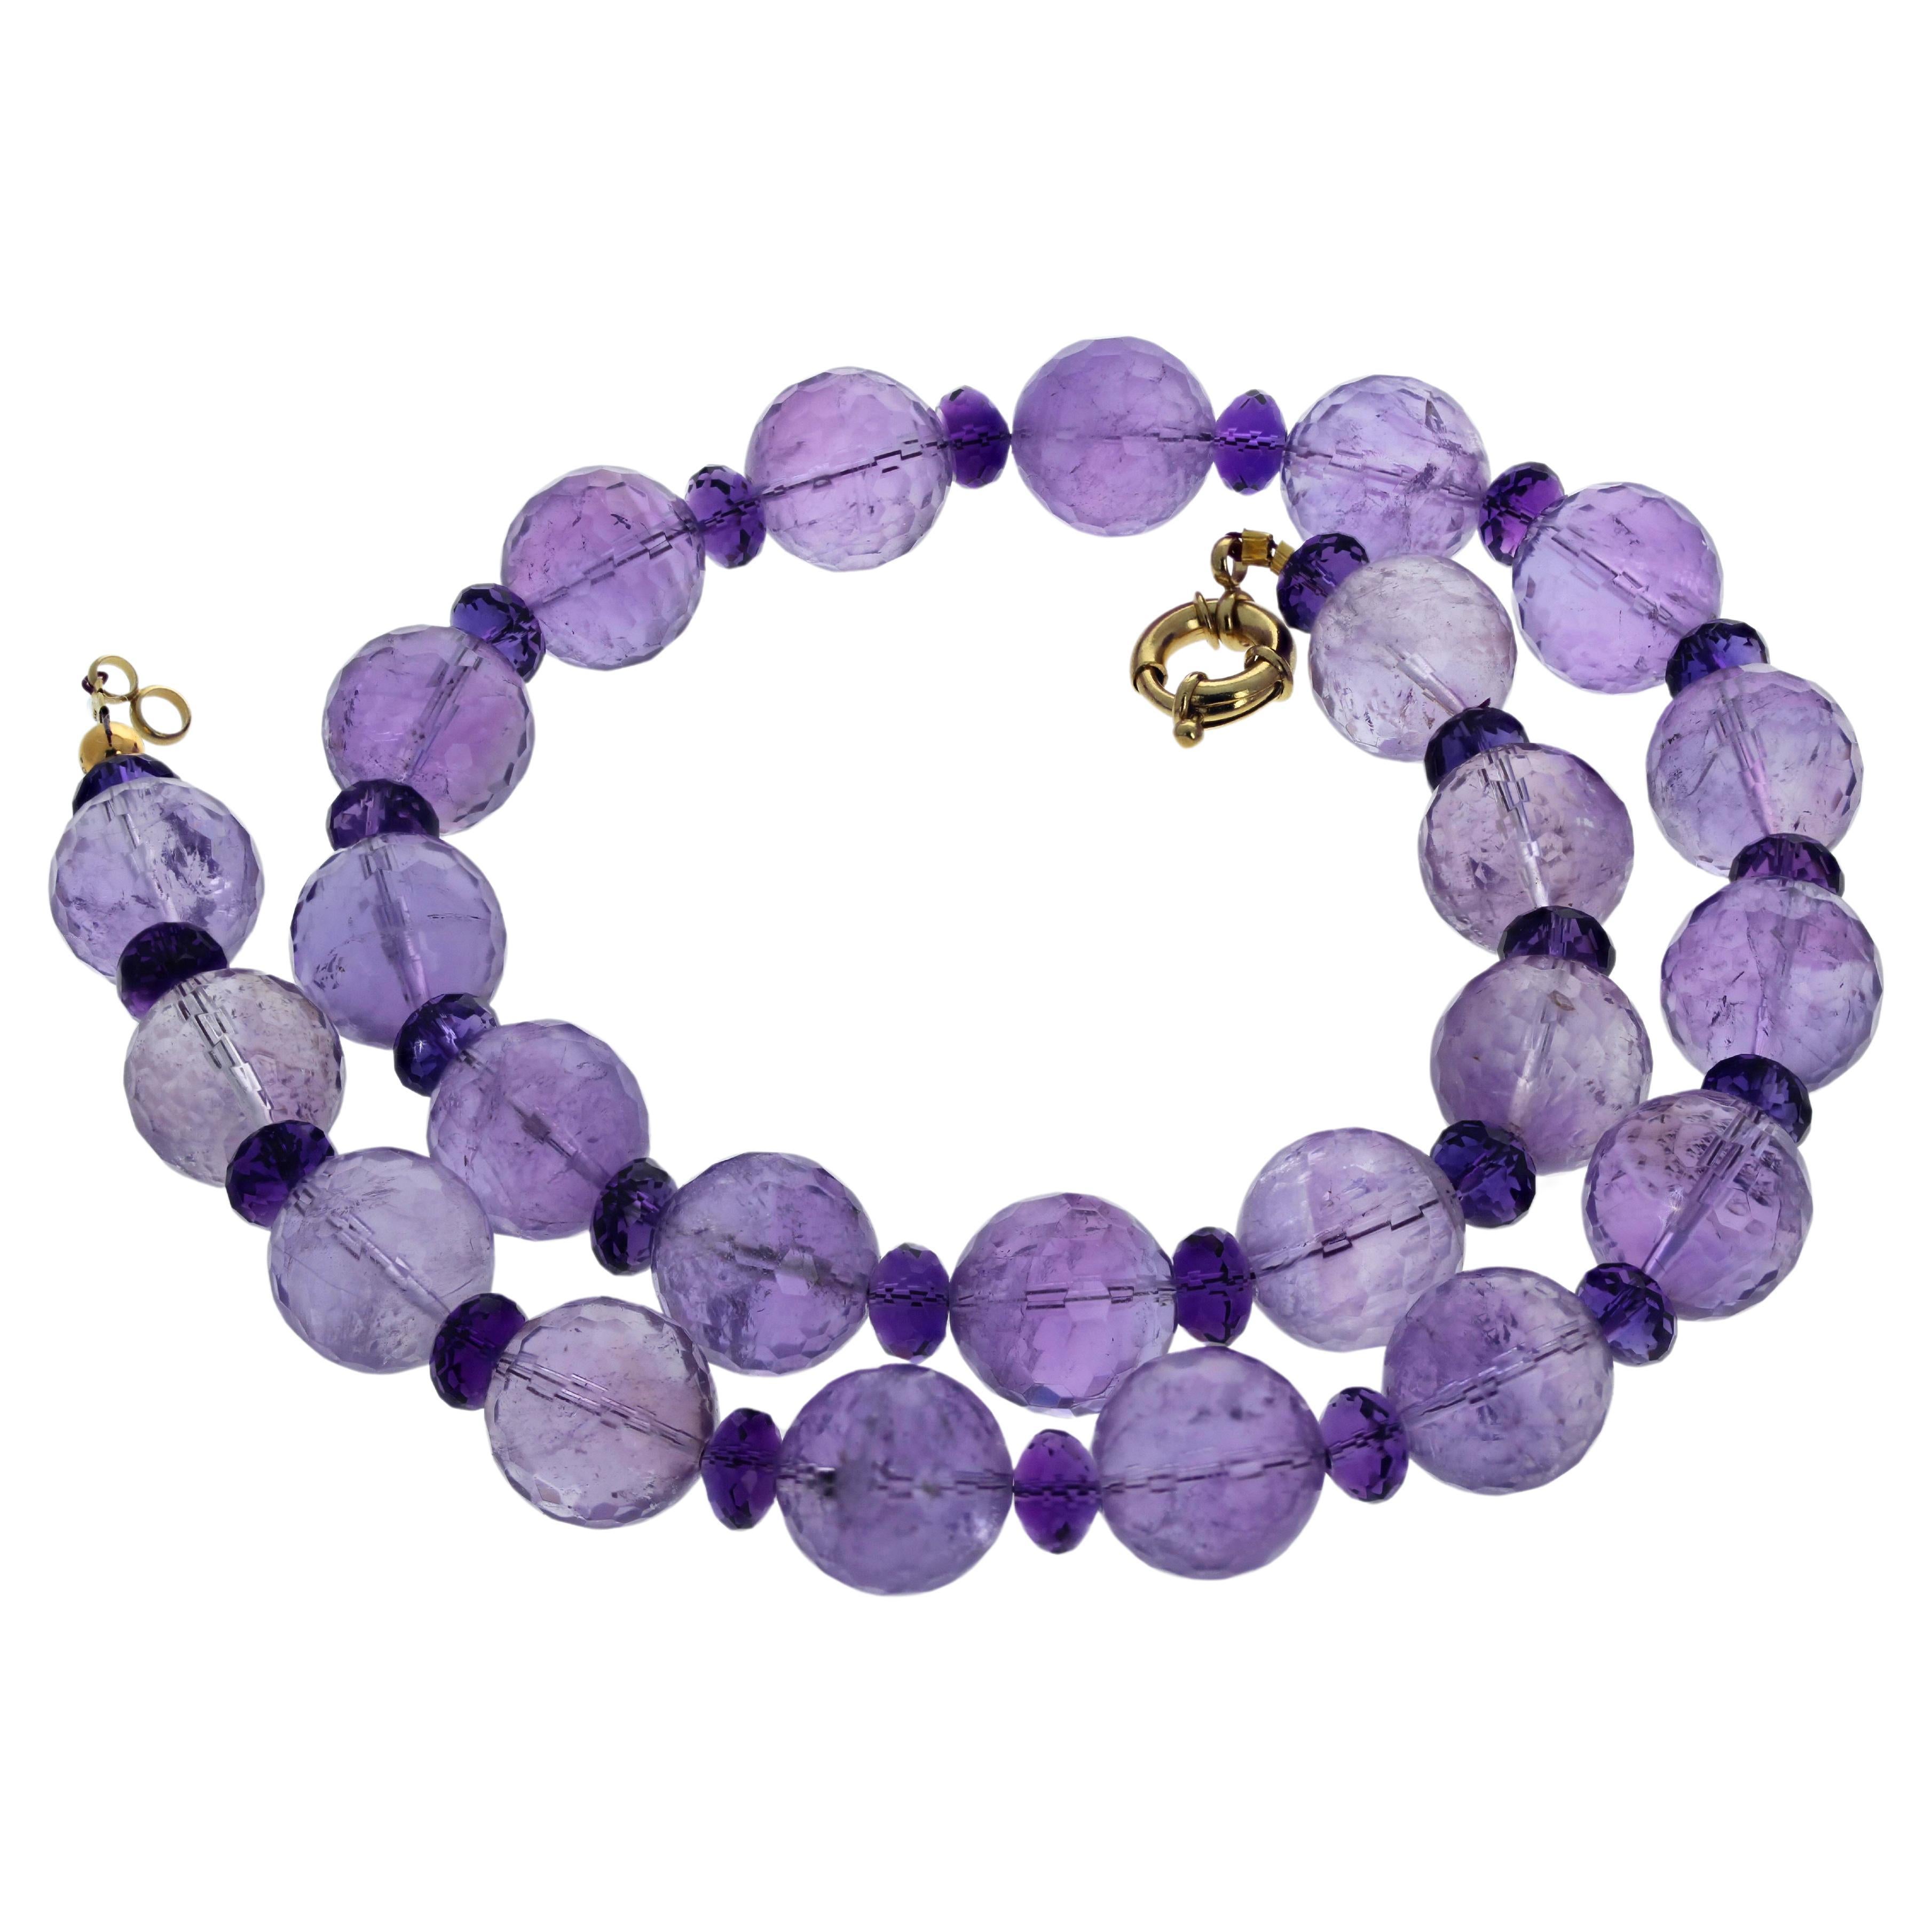 AJD Magnificent Large Round Polished Amethysts & Amethyst Gemcut Stones For Sale